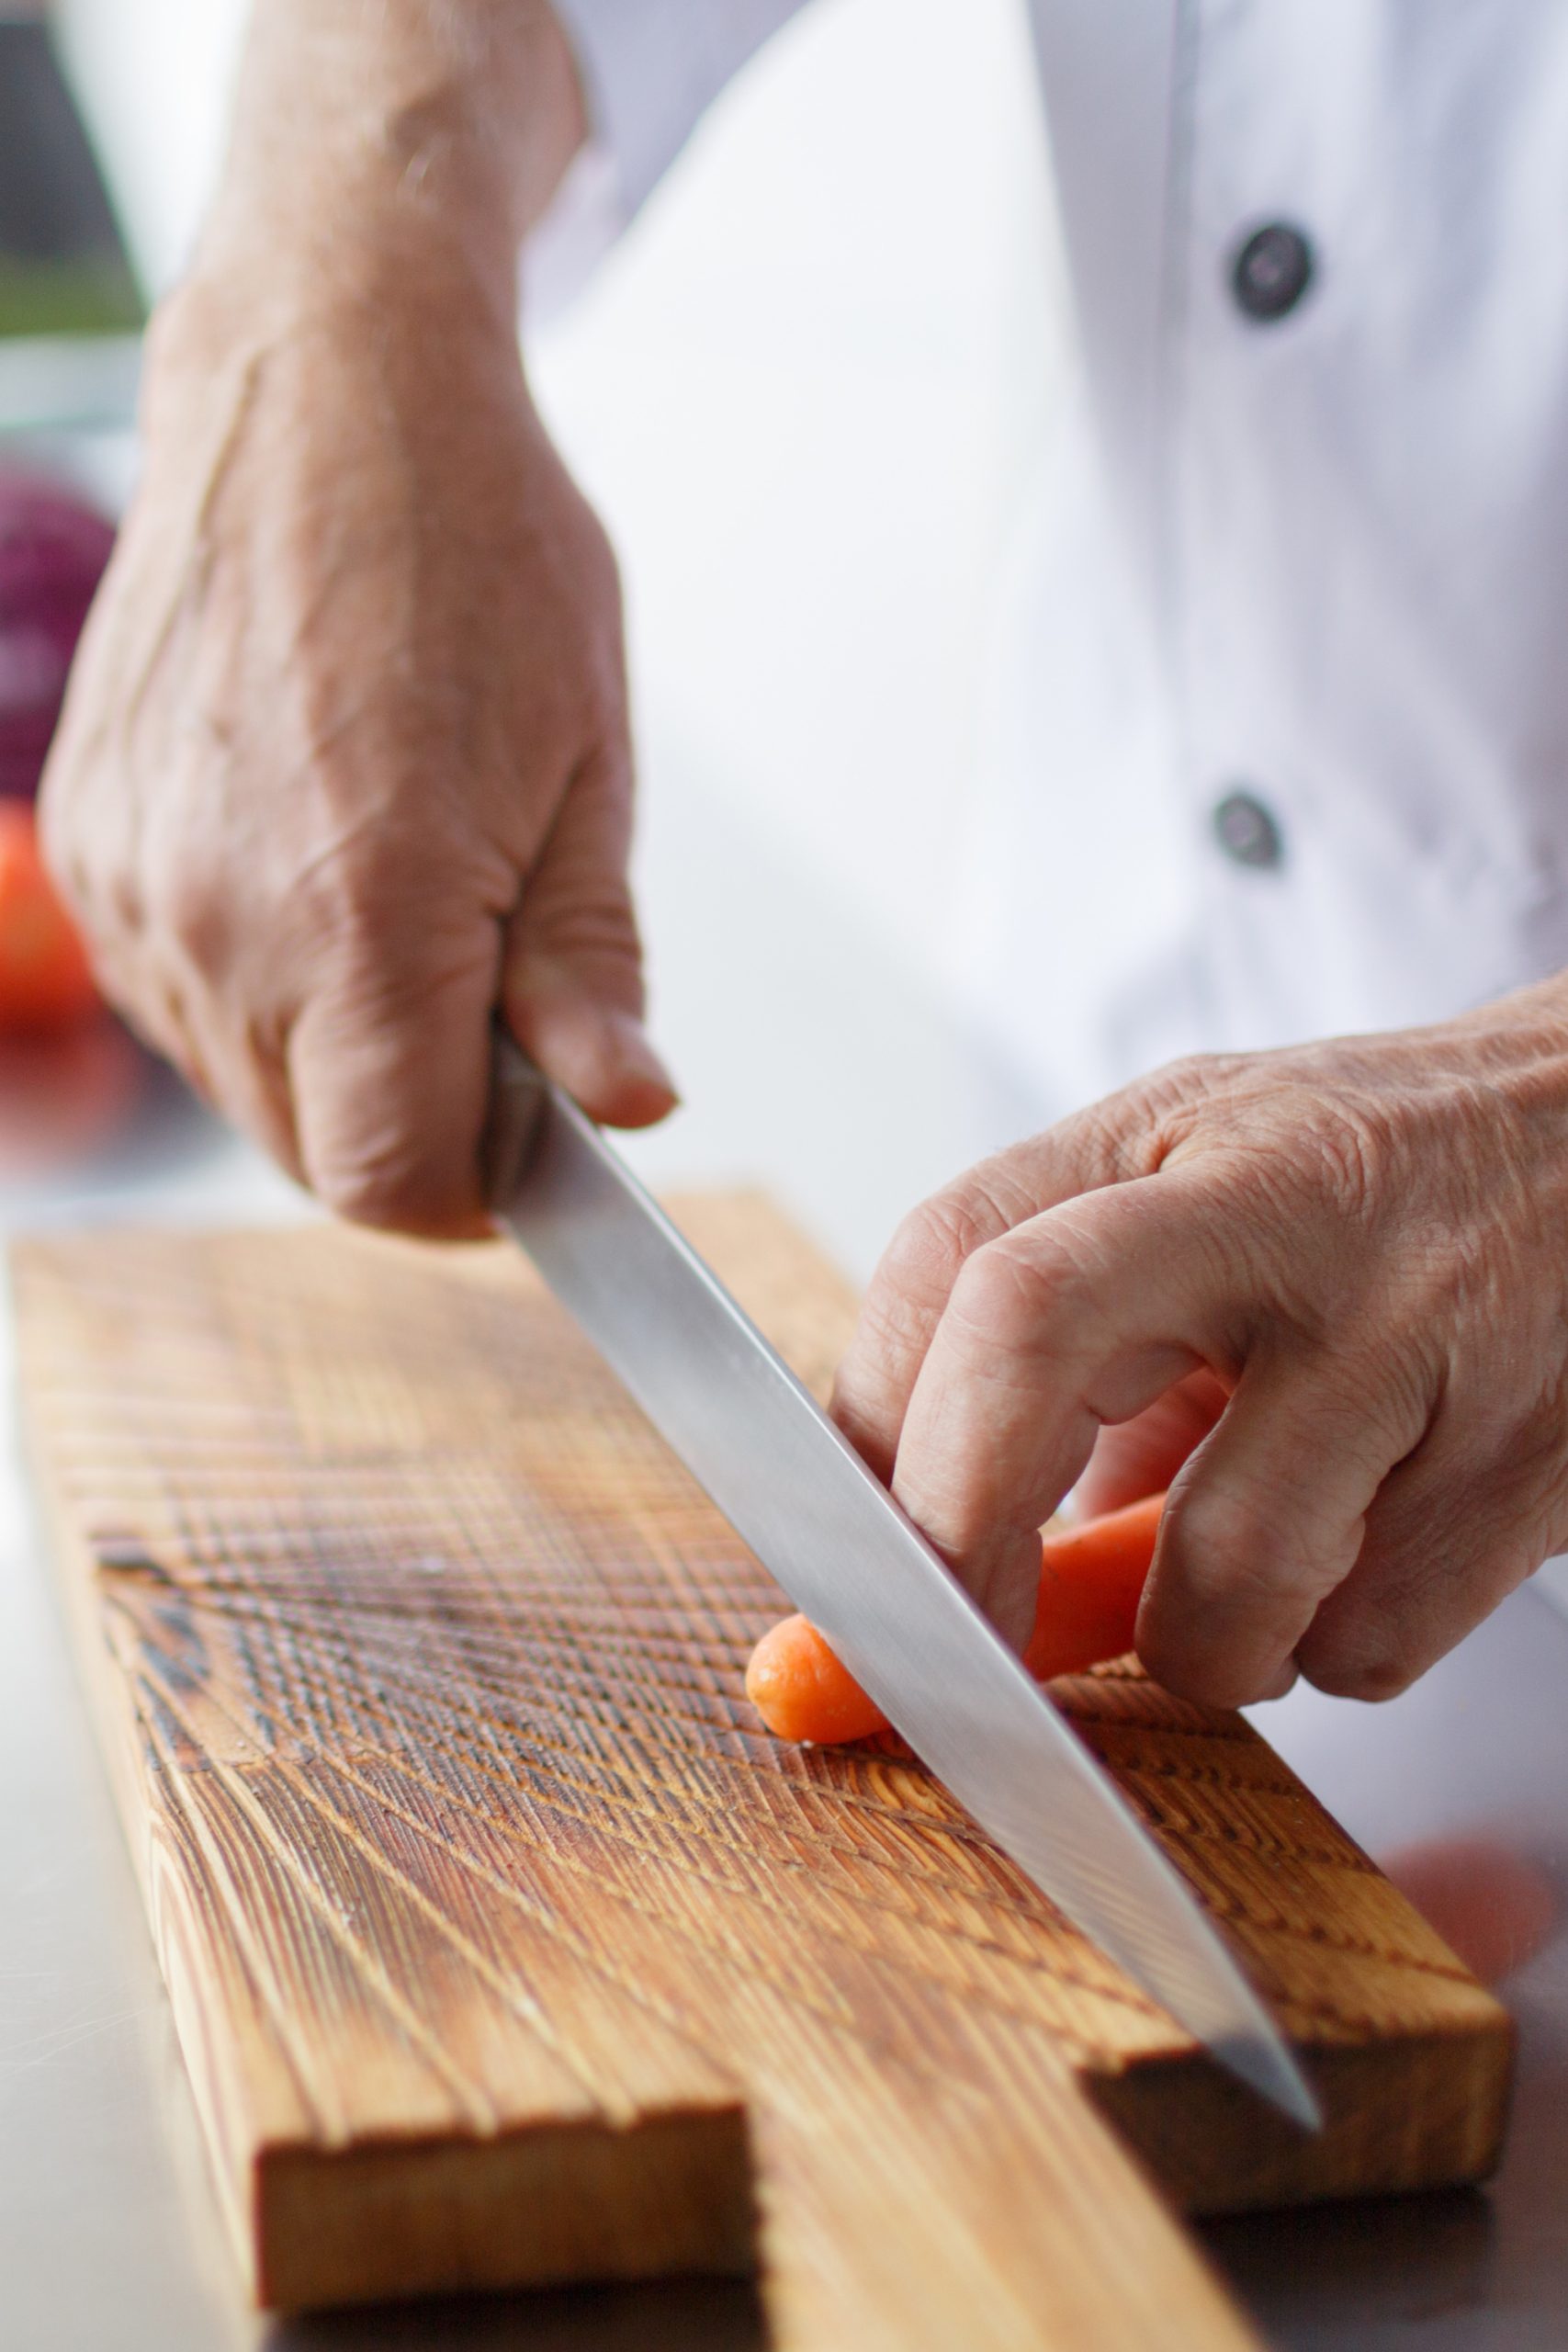 Best kitchen knives. A chef cutting a carrot on a wooden cutting board.